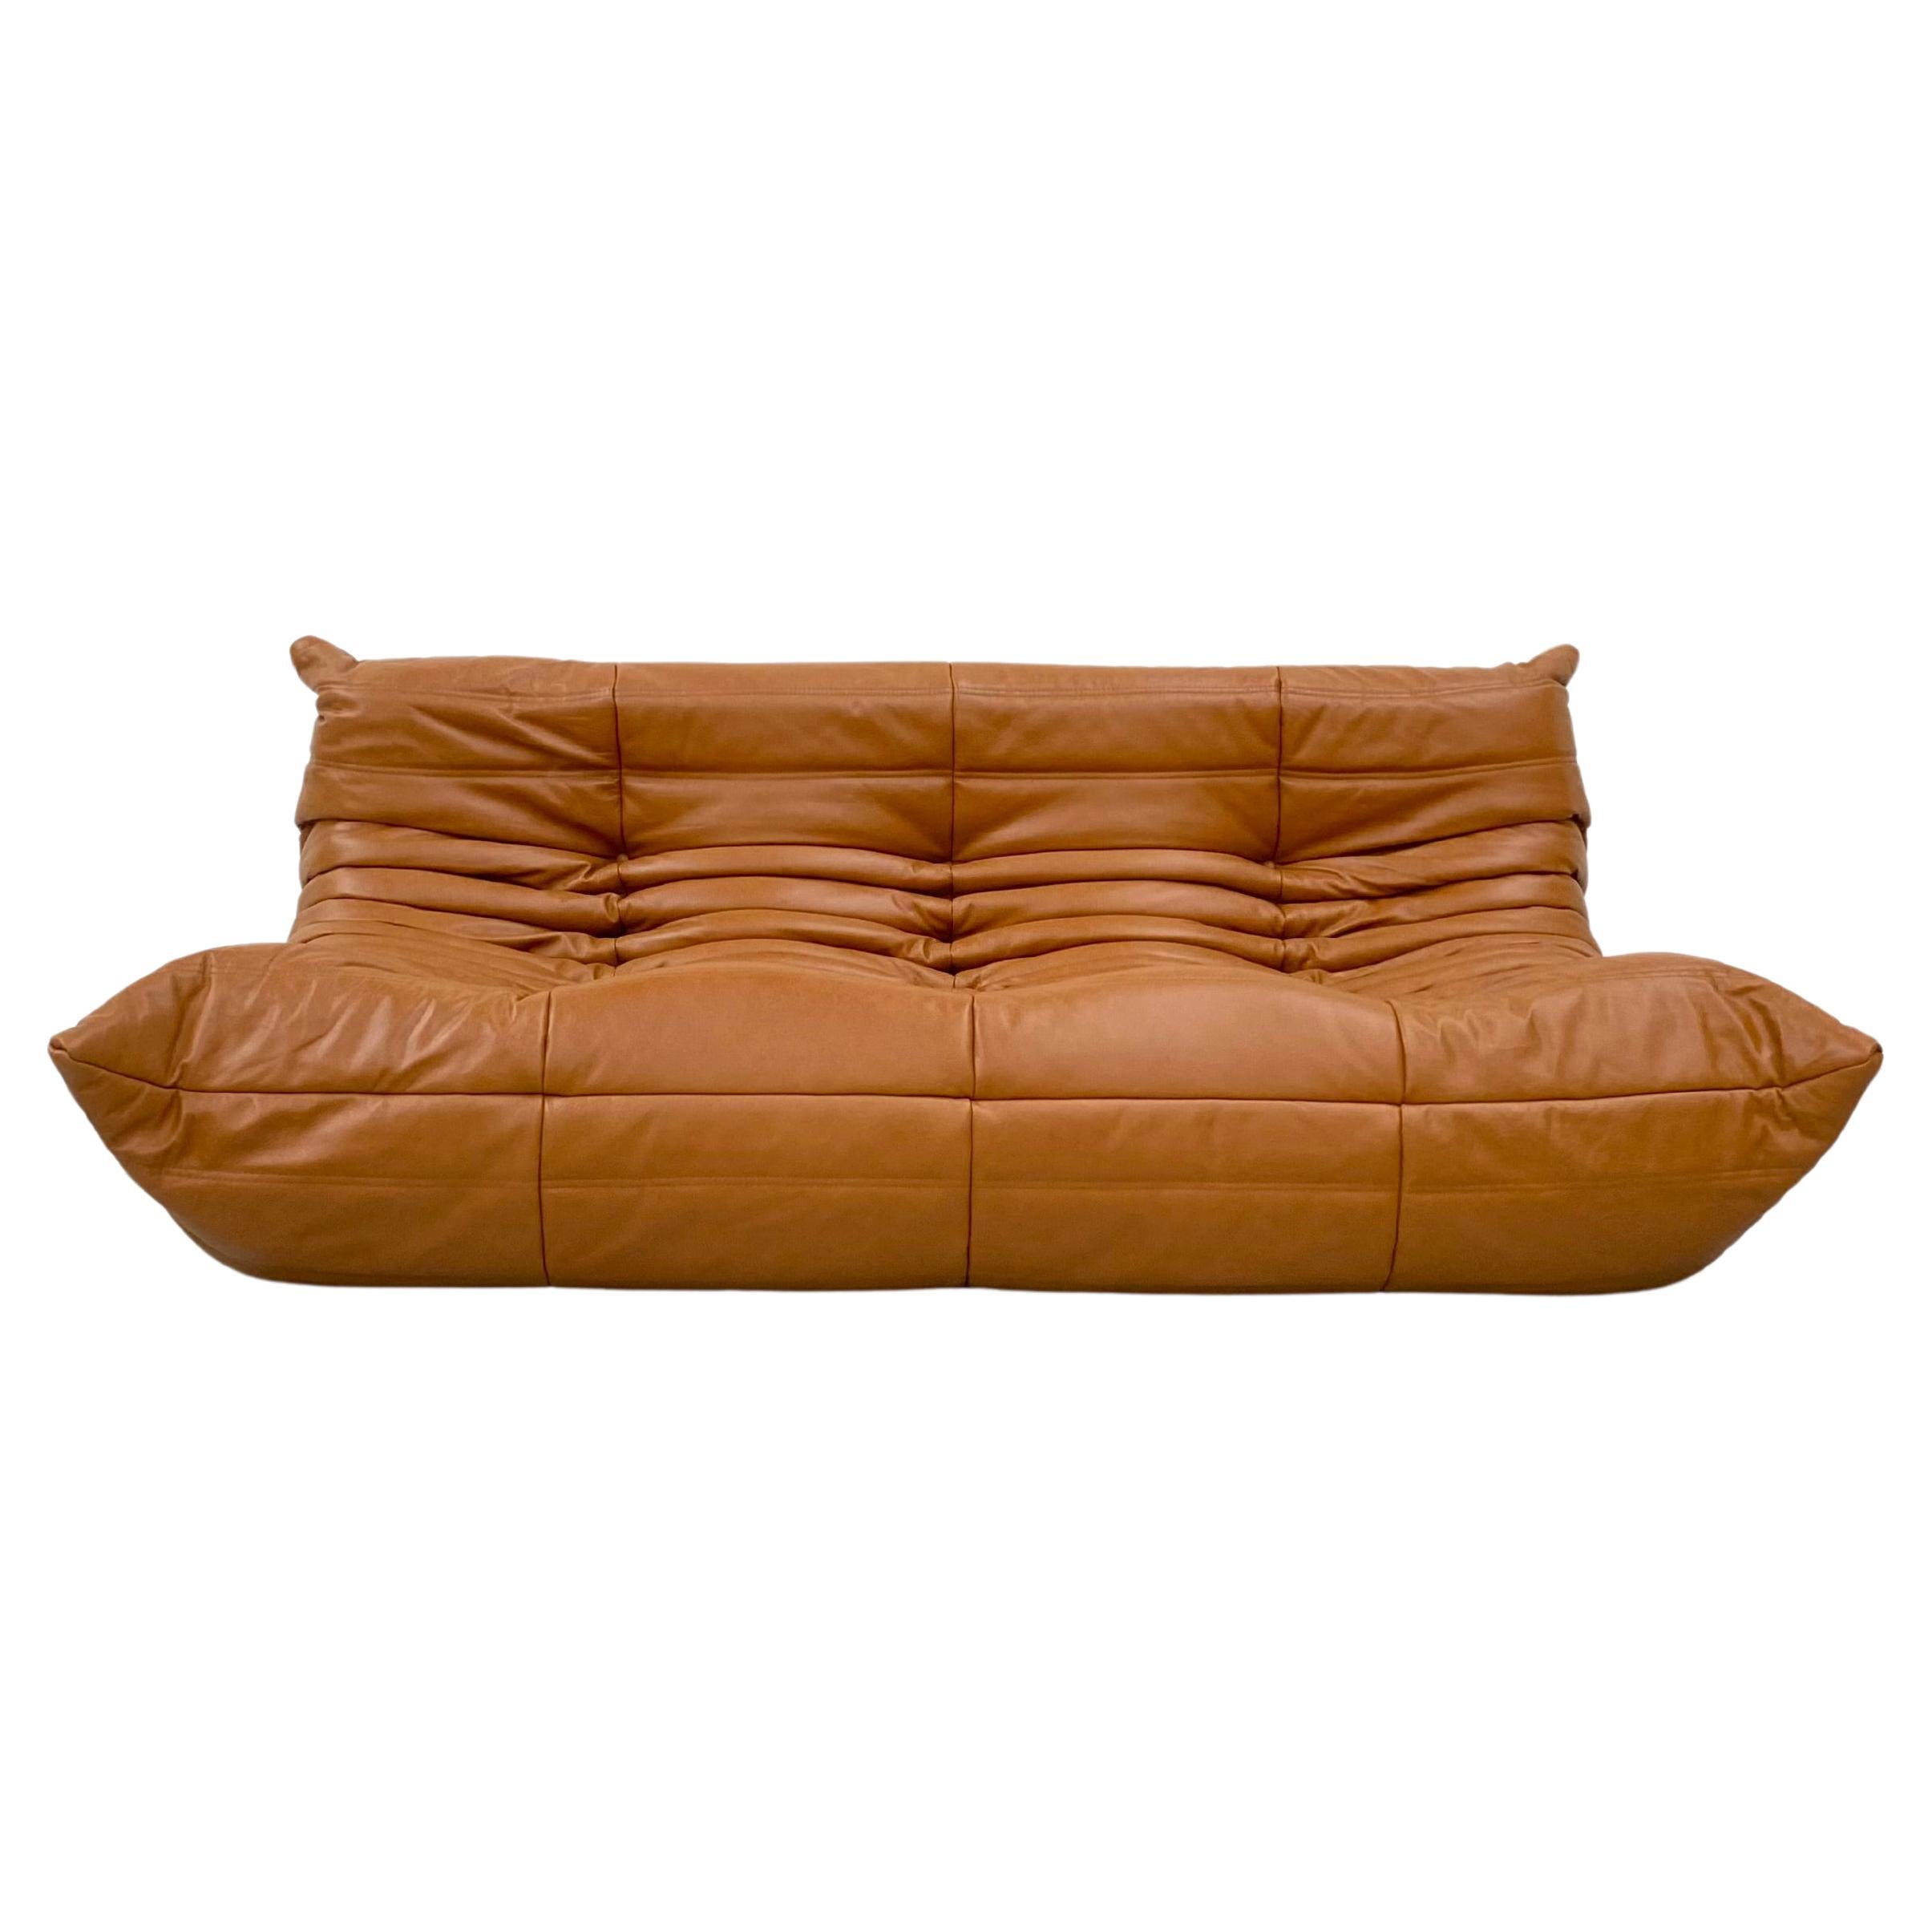 French Vintage Togo Sofa in Brown Leather by Michel Ducaroy for Ligne Roset. For Sale